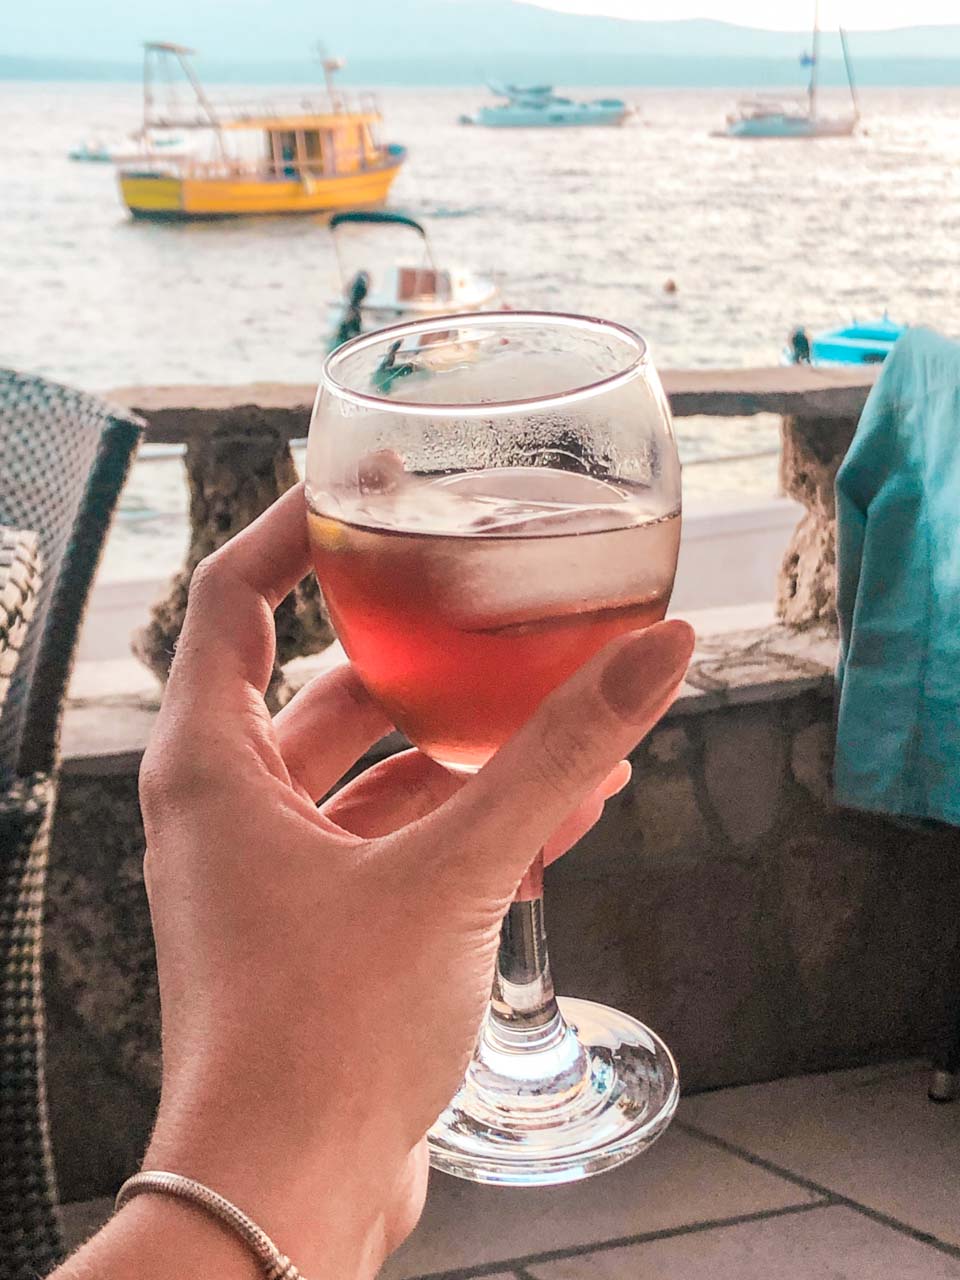 Female hand holding a glass of Prošek wine with boats on the Adriatic Sea in the background